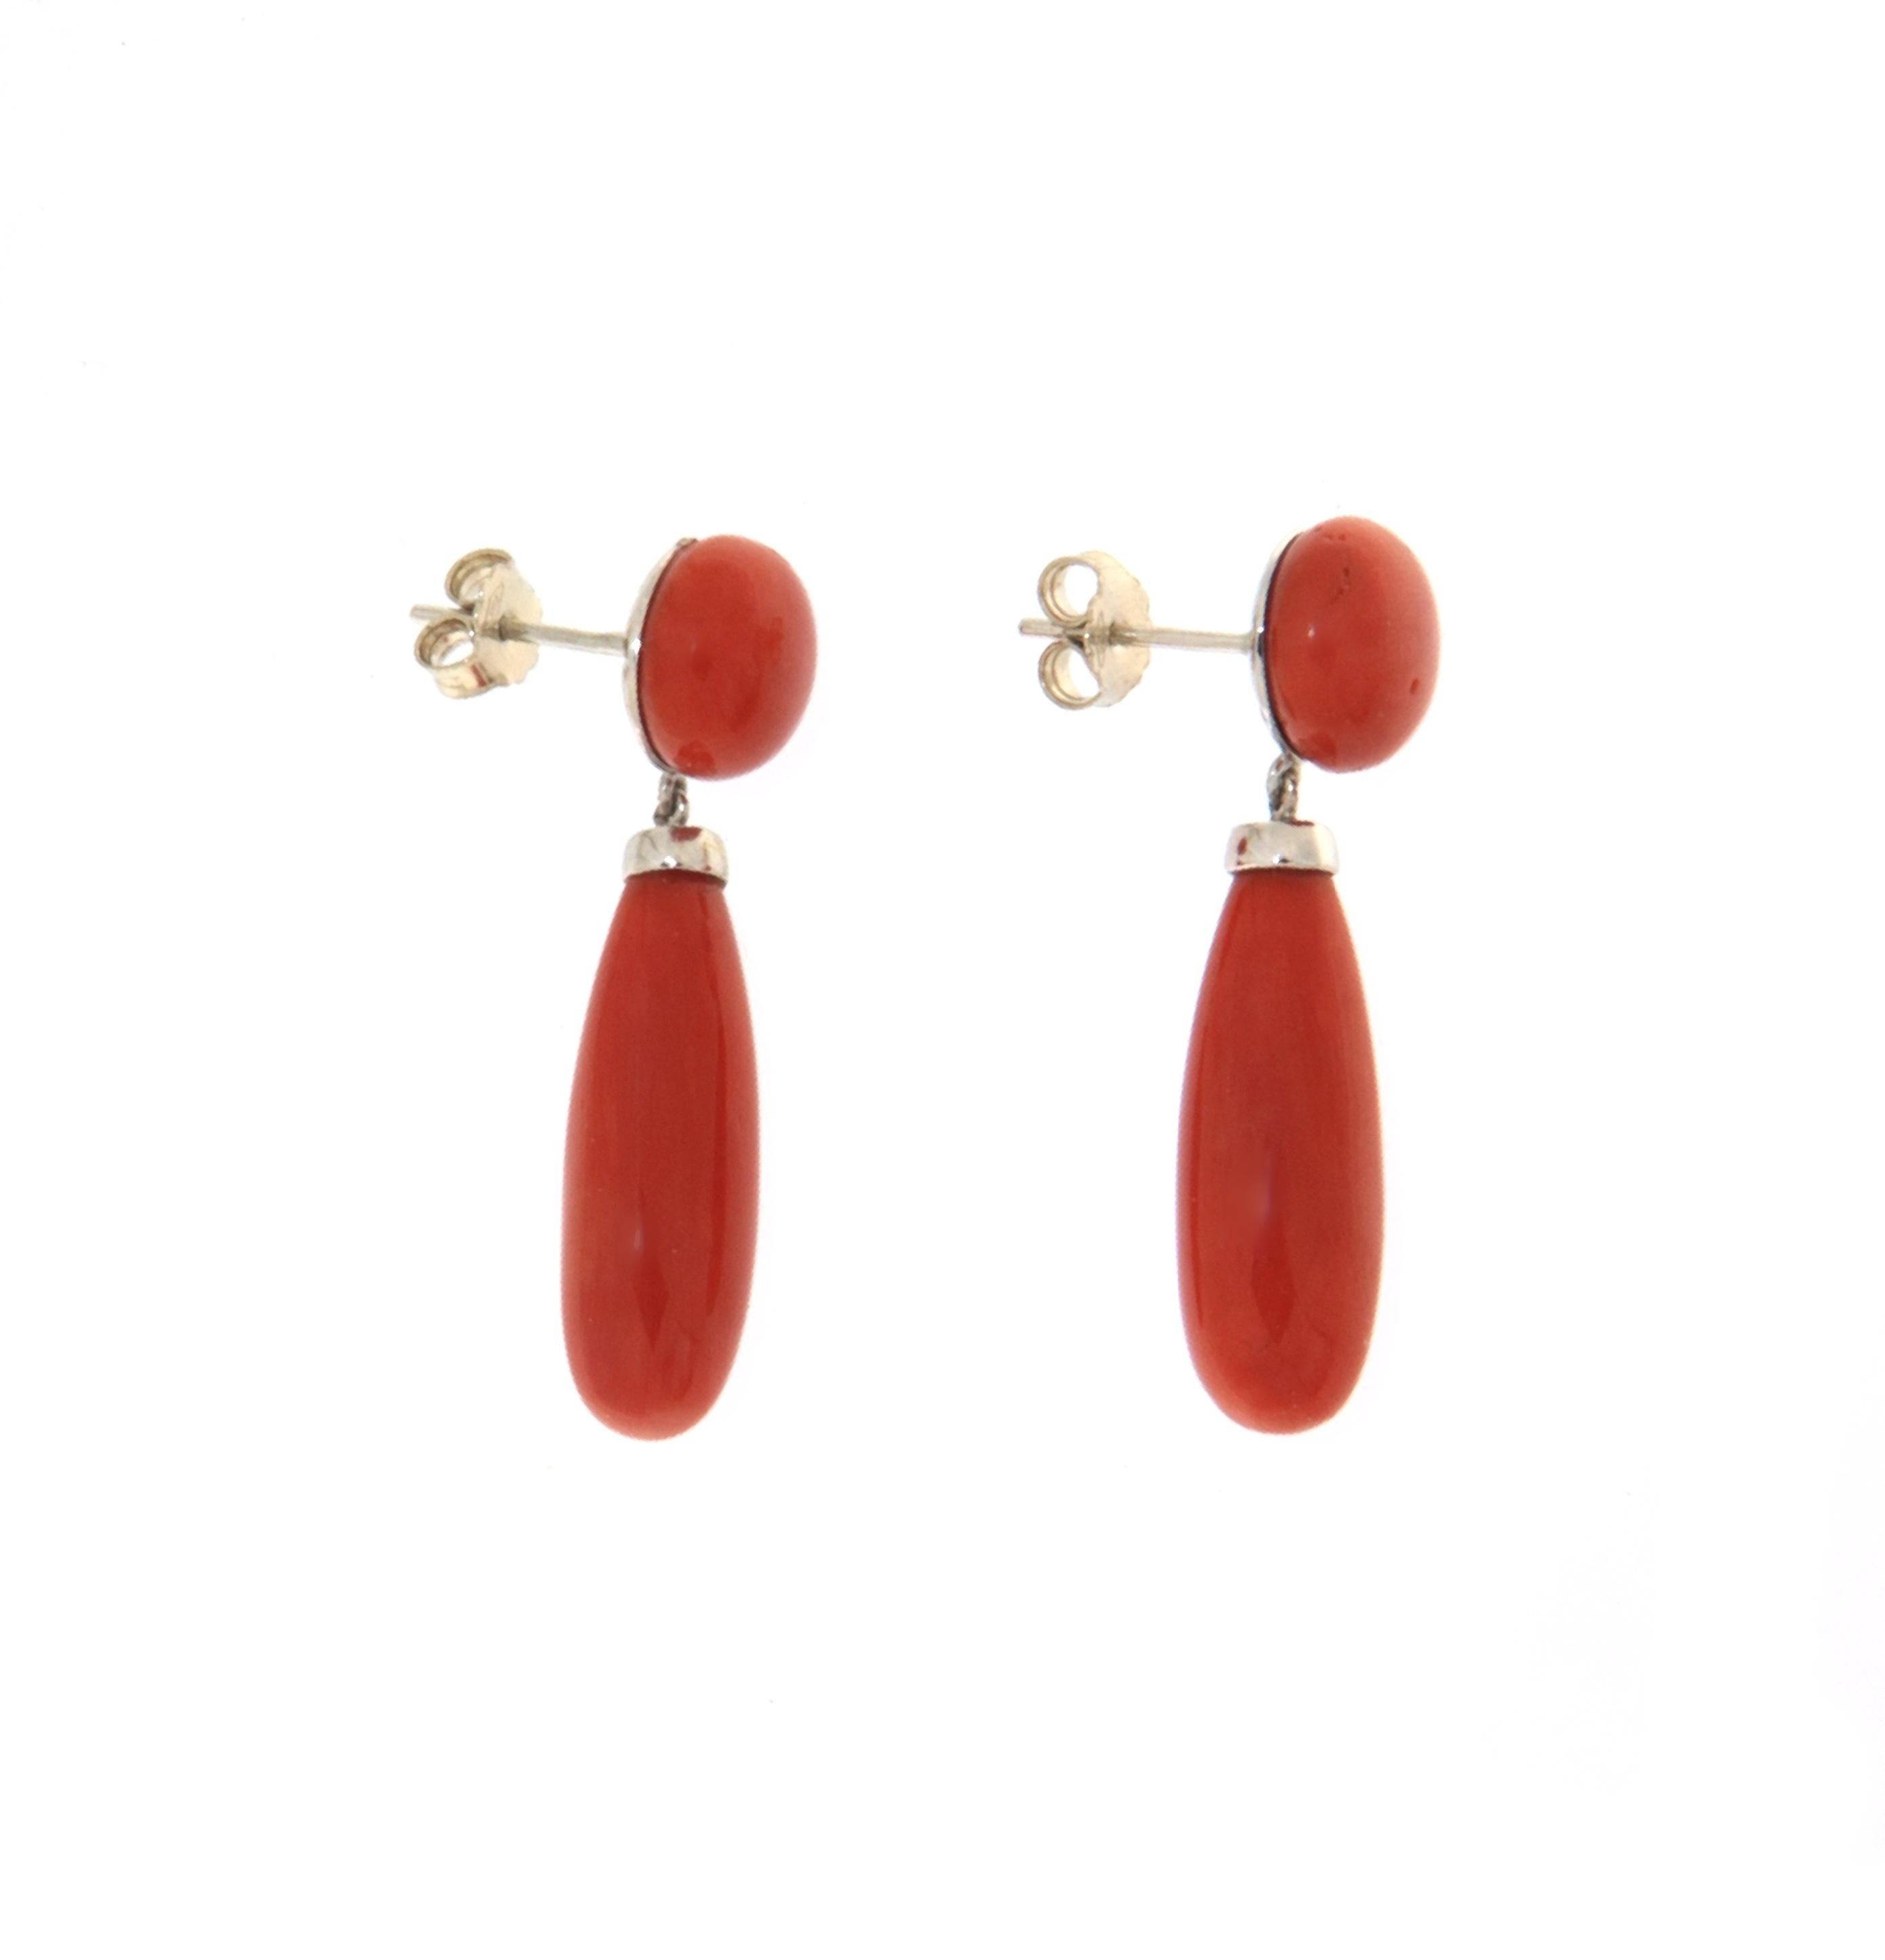 
These exclusive earrings in 18-karat white gold combine timeless elegance with the natural charm of Sardinian coral, creating a wearable work of art that captures the essence of the Mediterranean. At the top of each earring, a coral button